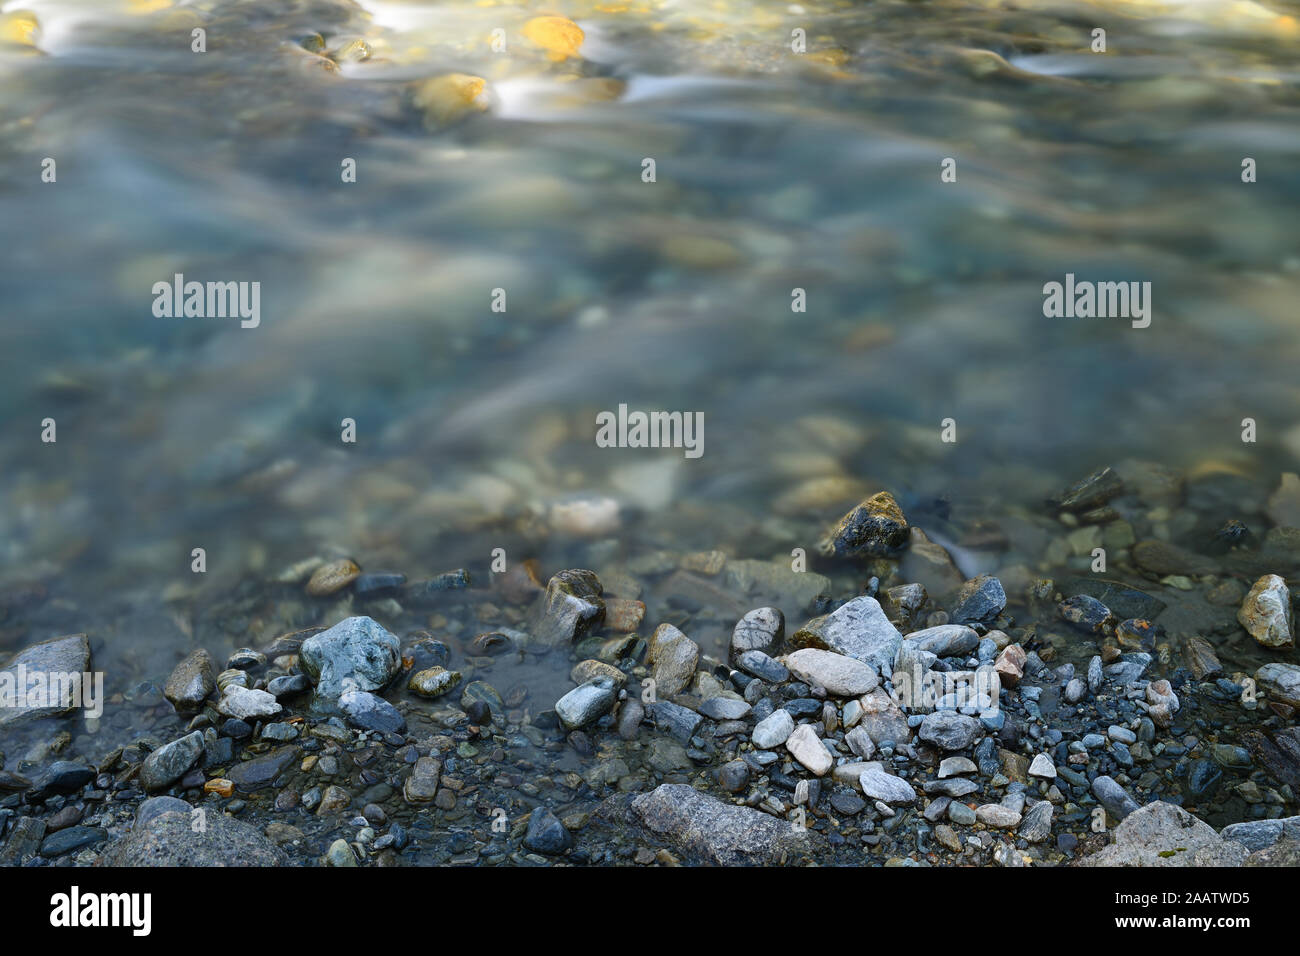 Alpine mountain river with beautiful natural rocks and pebbles. Long exposure photography, capturing motion. Stock Photo